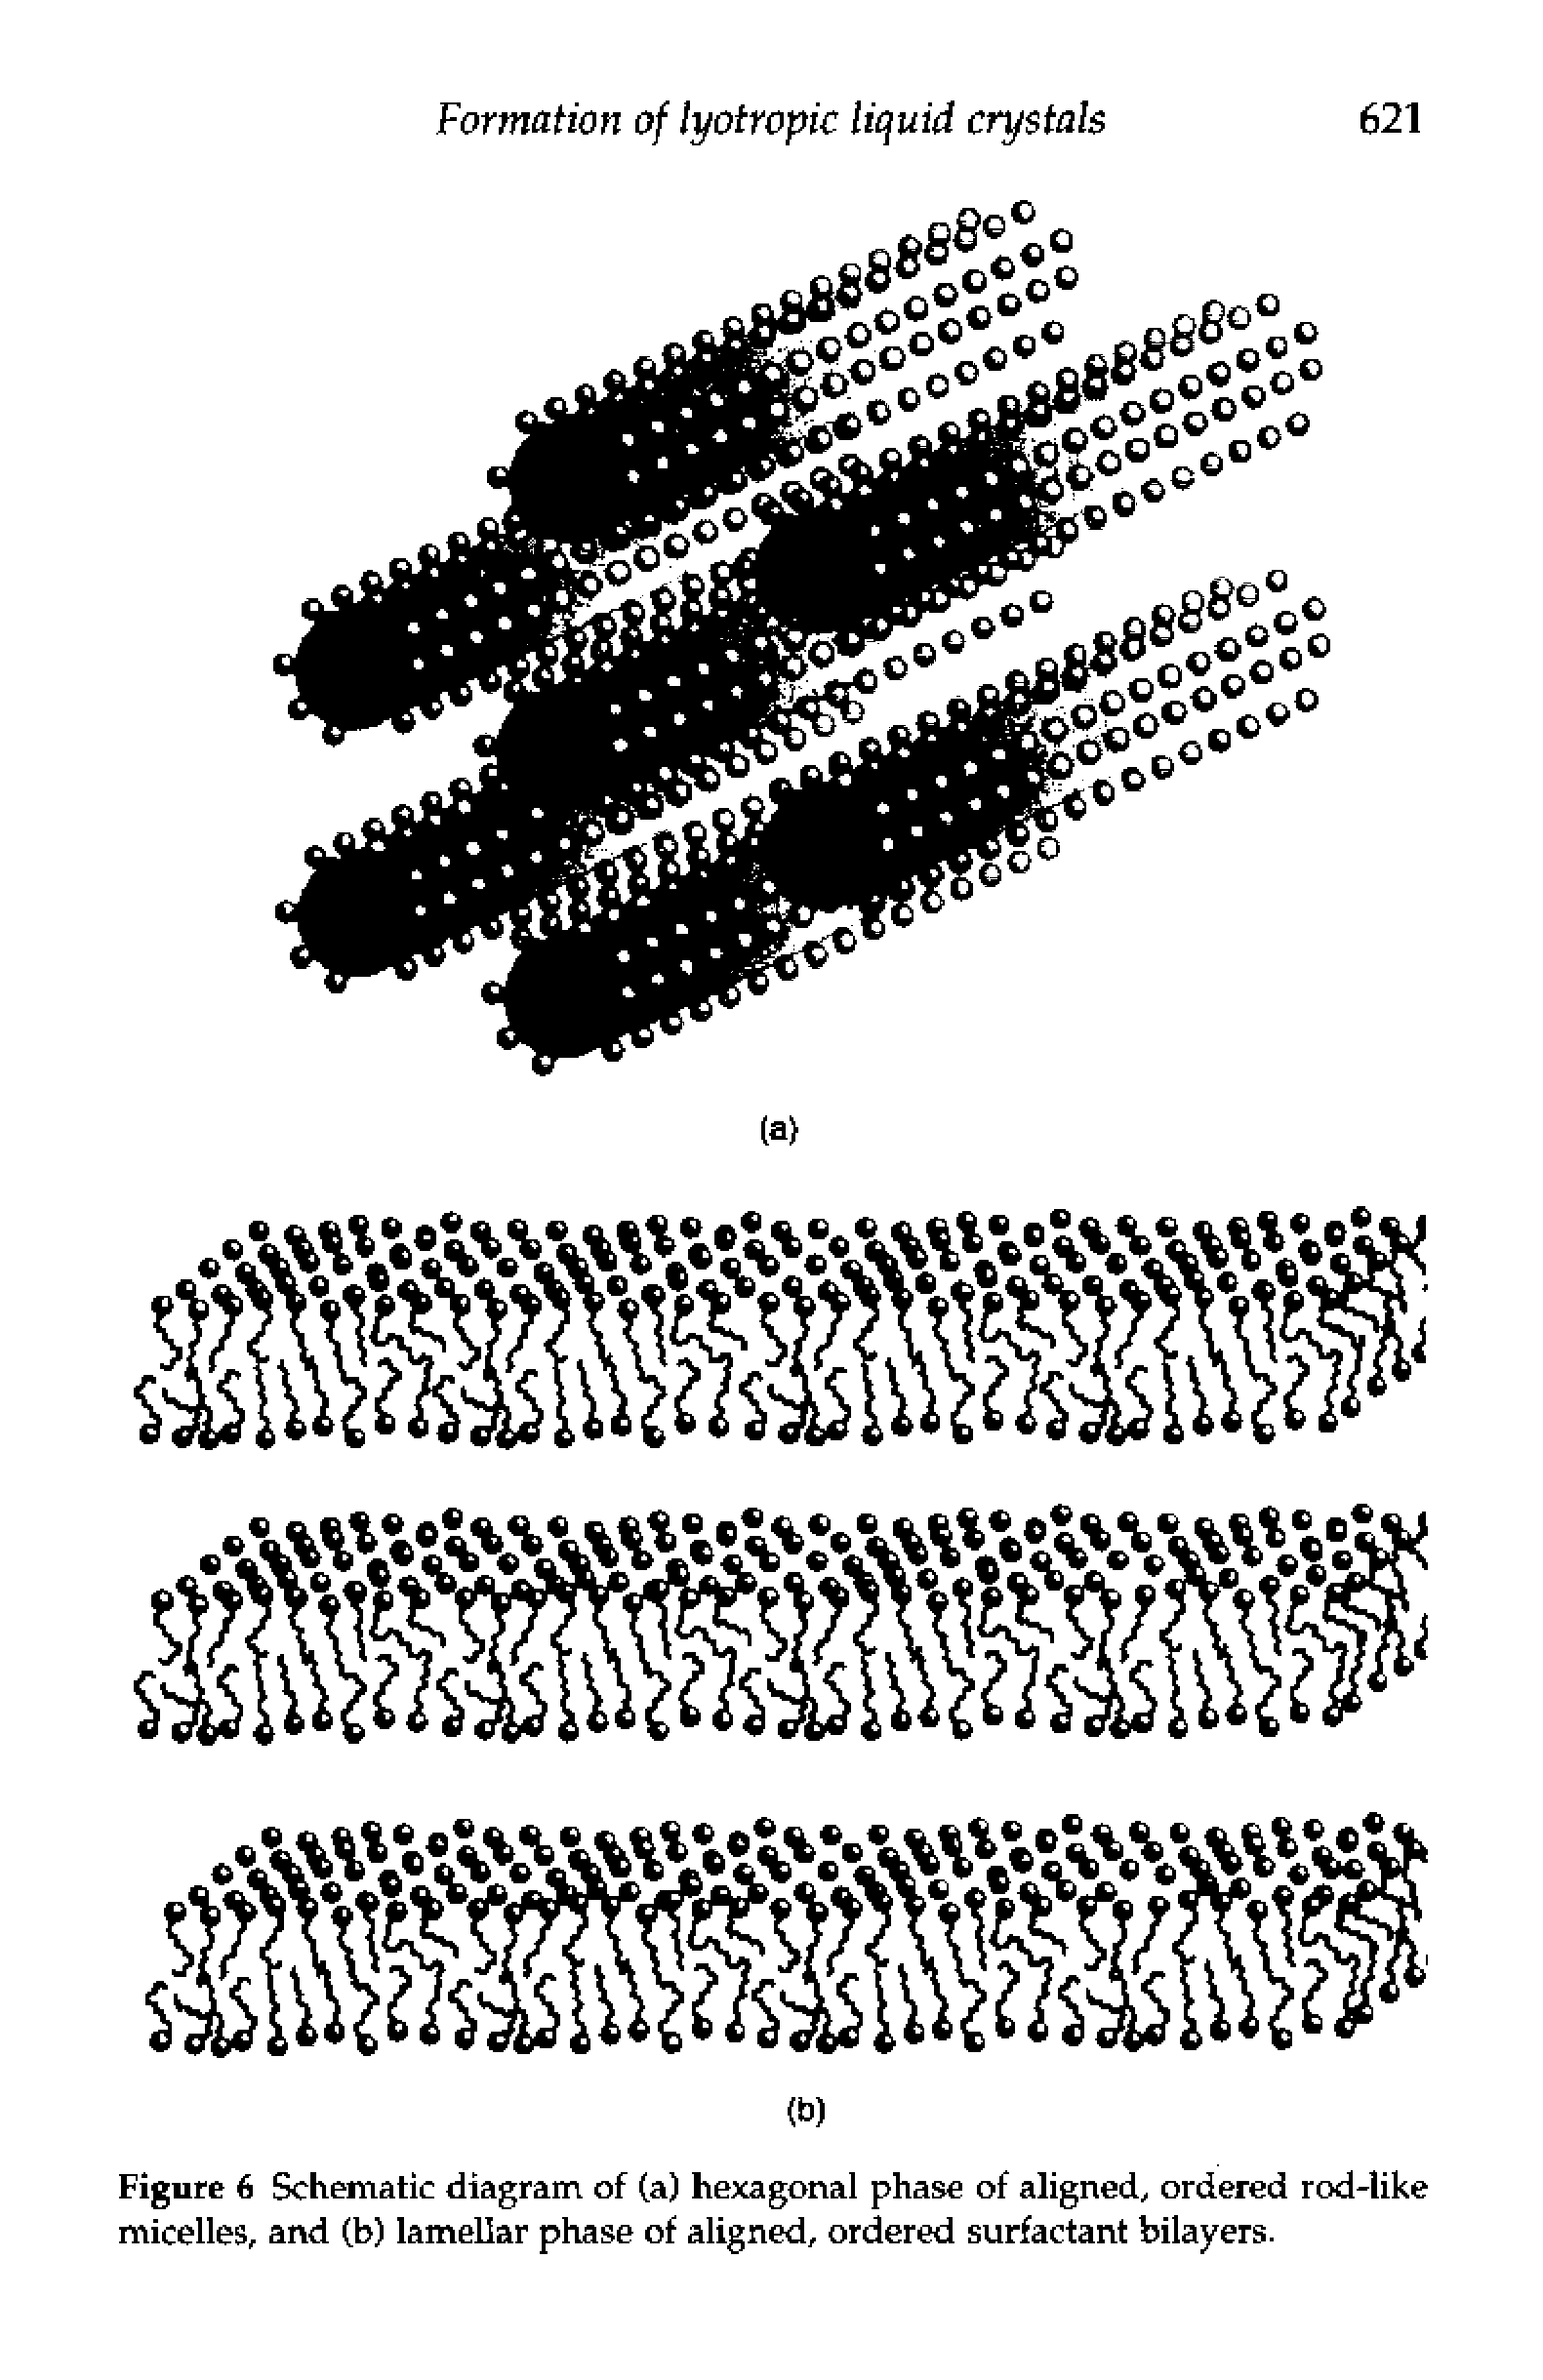 Figure 6 Schematic diagram of (a) hexagonal phase of aligned, ordered rod-like micelles, and (b) lamellar phase of aligned, ordered surfactant bilayers.